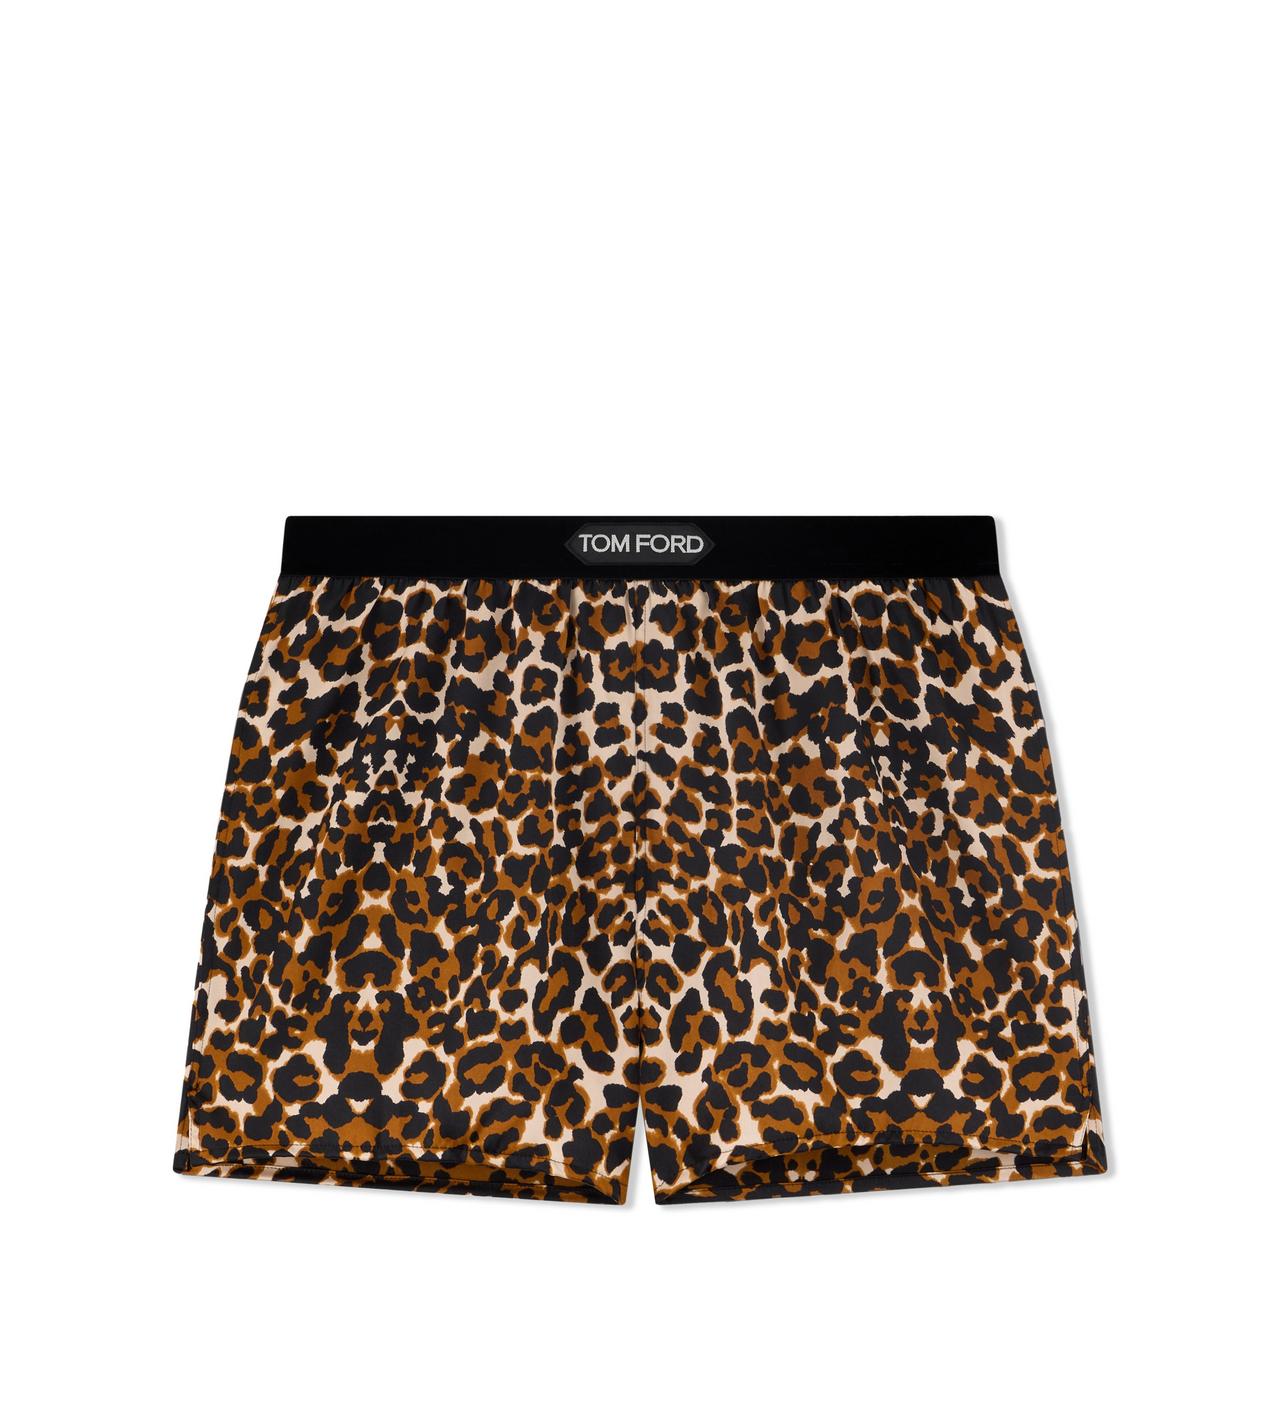 REFLECTED LEOPARD PATTERN SILK SATIN BOXER SHORTS image number 0